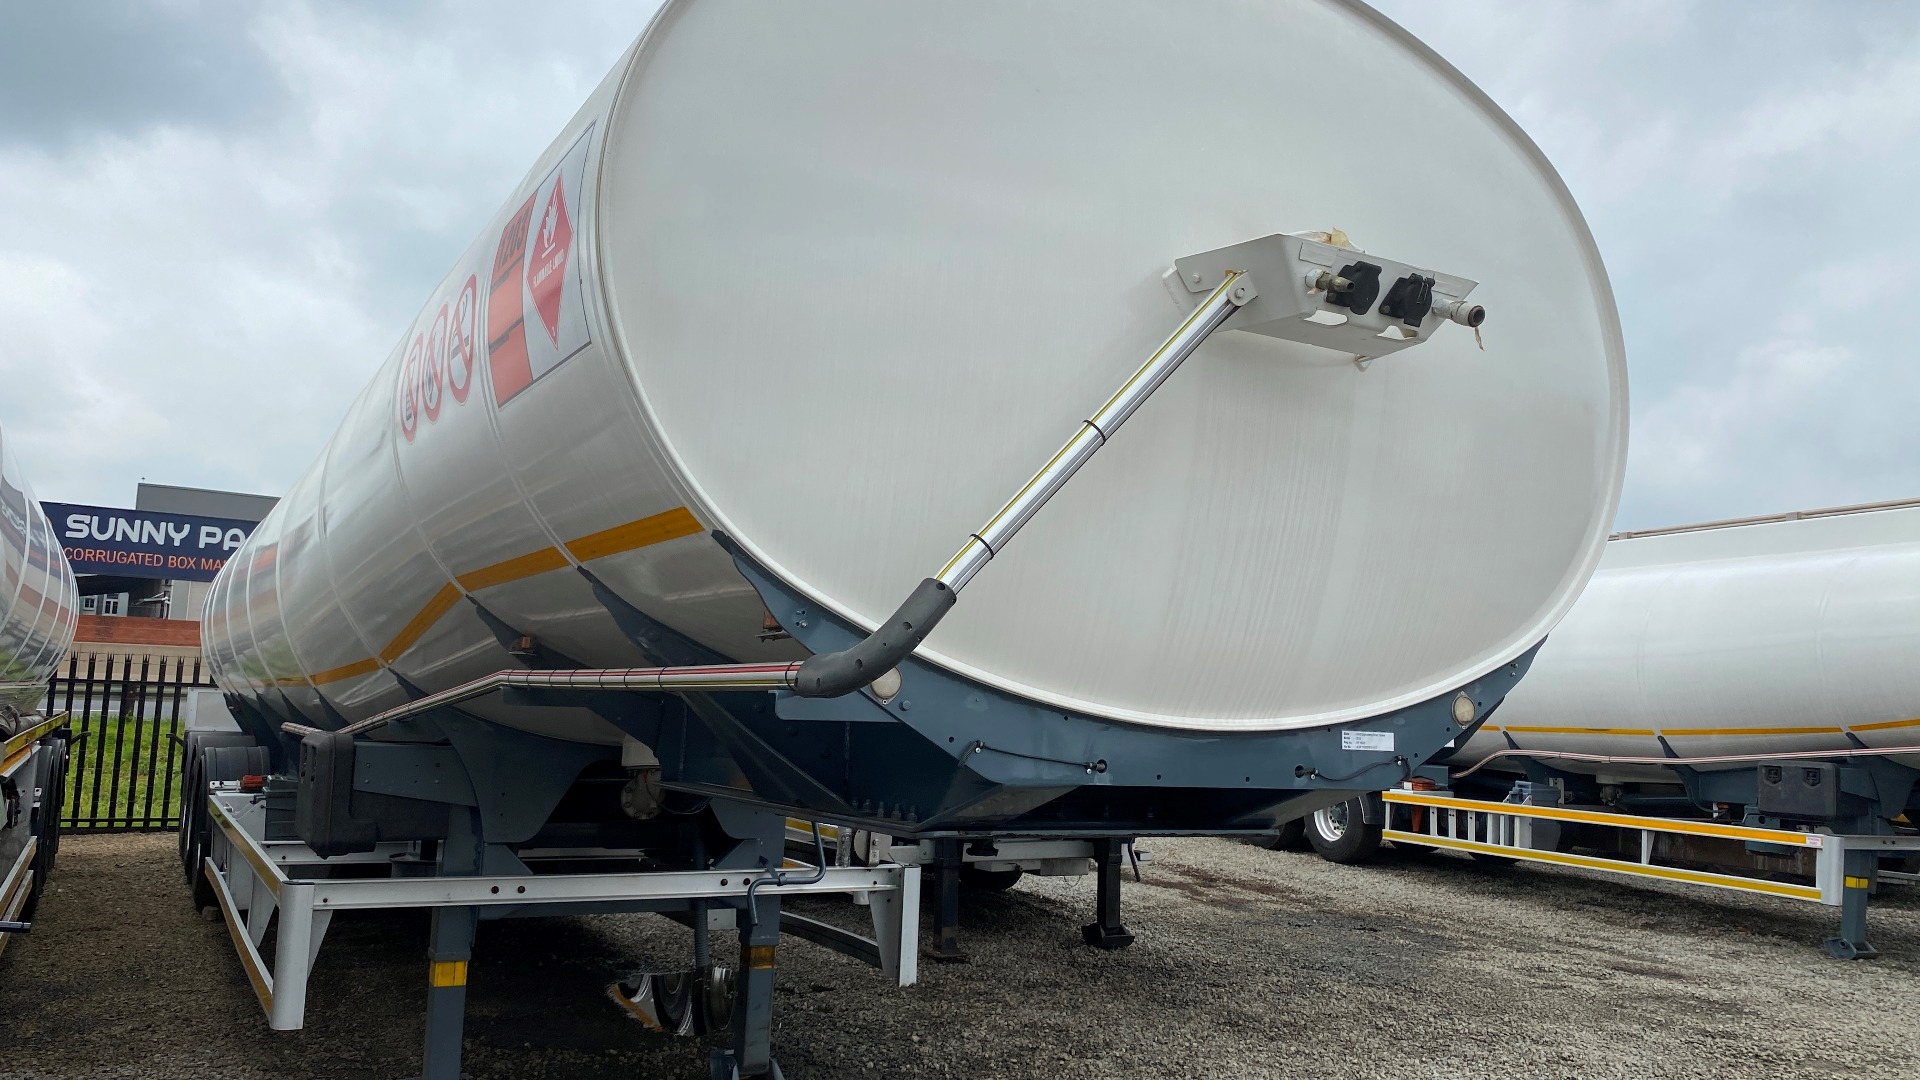 GRW Fuel tanker 2015   49 000 Litres GRW Fuel Tanker 2015 for sale by Manmar Truck And Trailer | Truck & Trailer Marketplaces